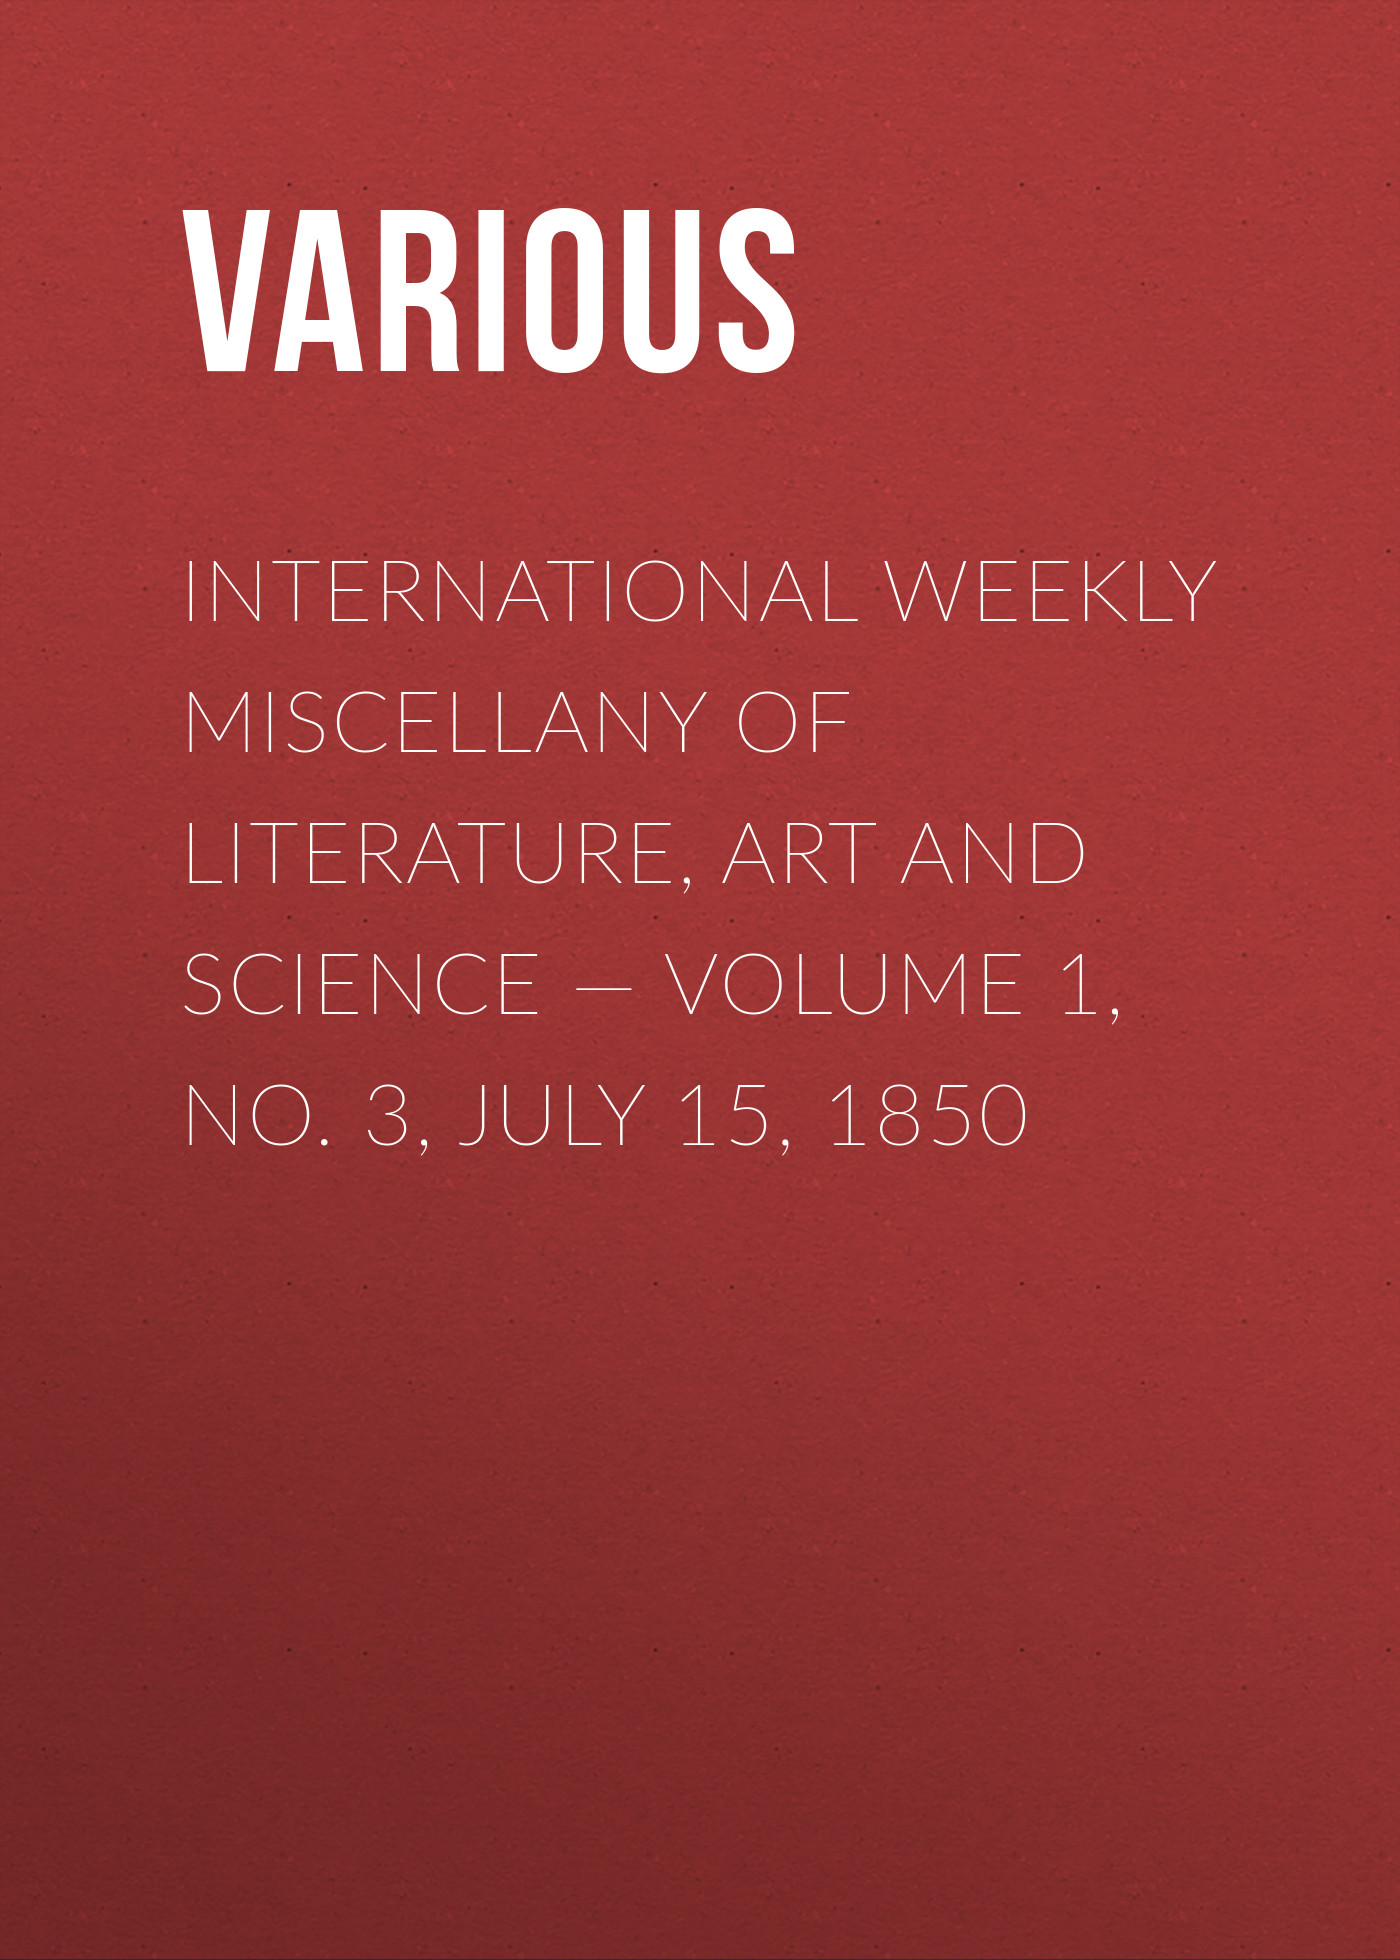 International Weekly Miscellany of Literature, Art and Science— Volume 1, No. 3, July 15, 1850